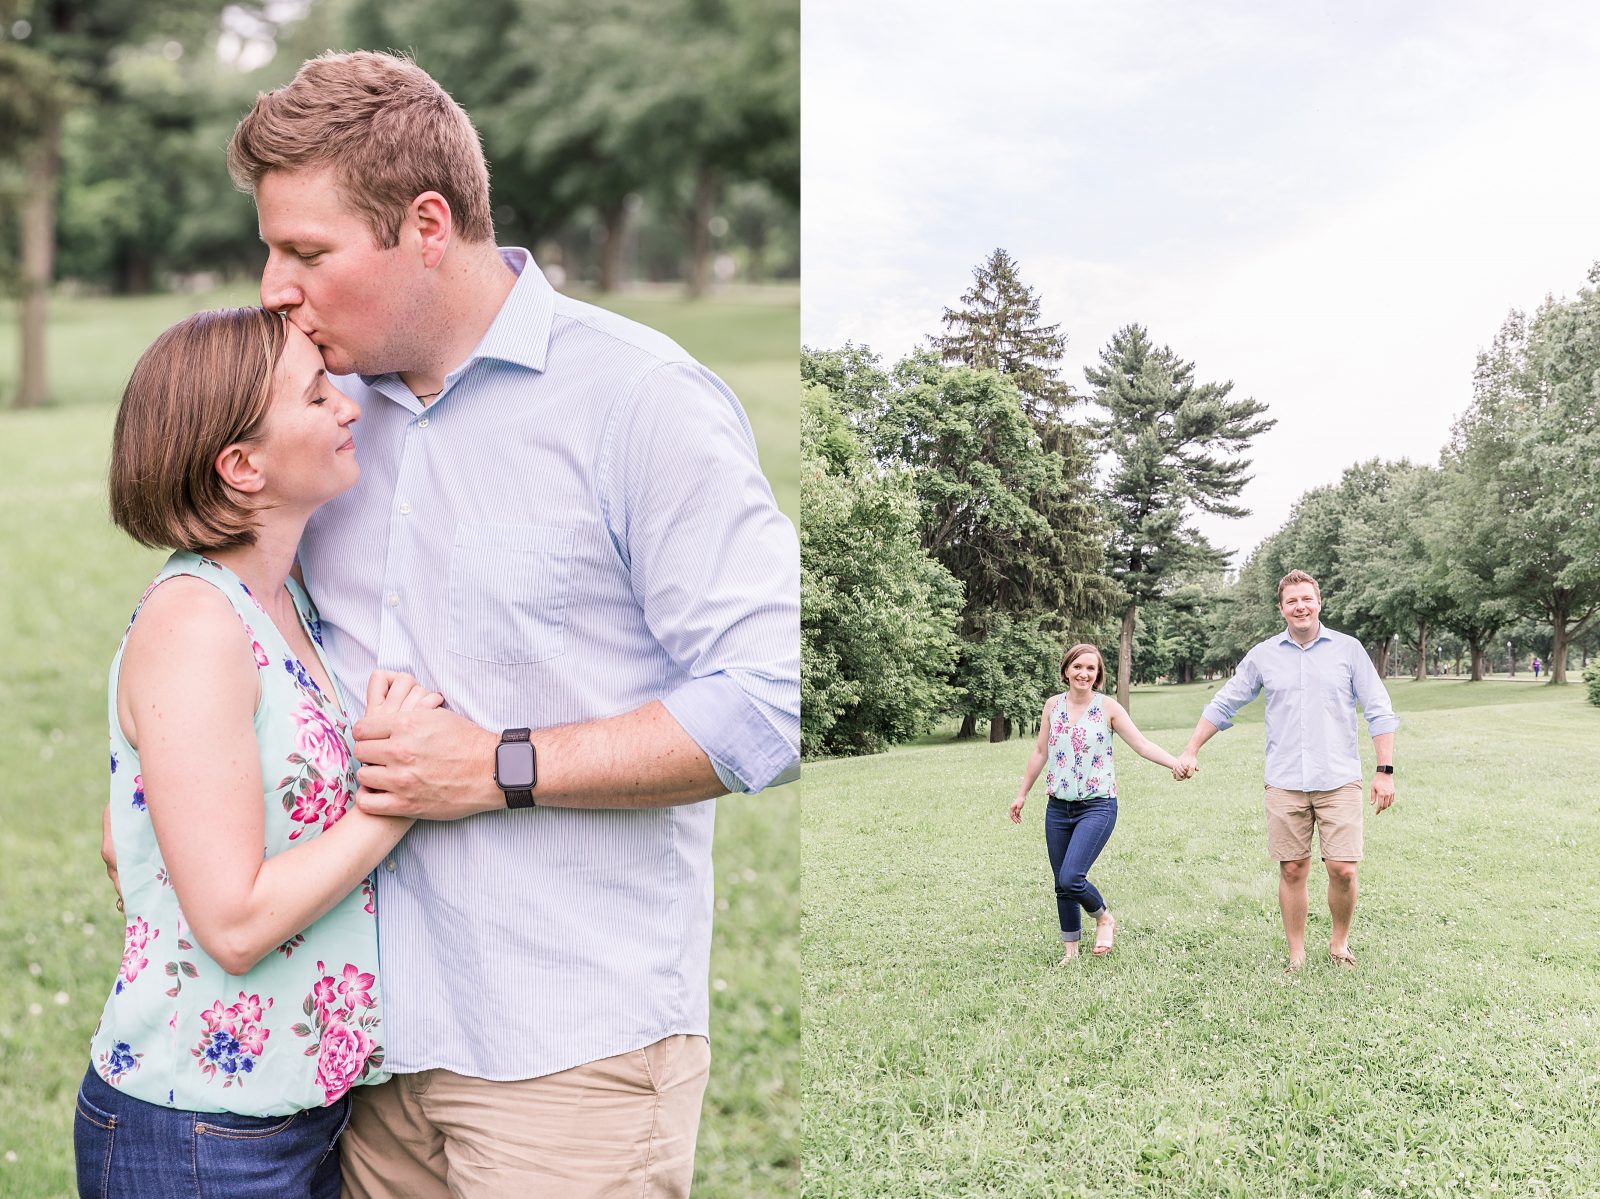 Engagement photos in the park by Diana Gramlich Photography